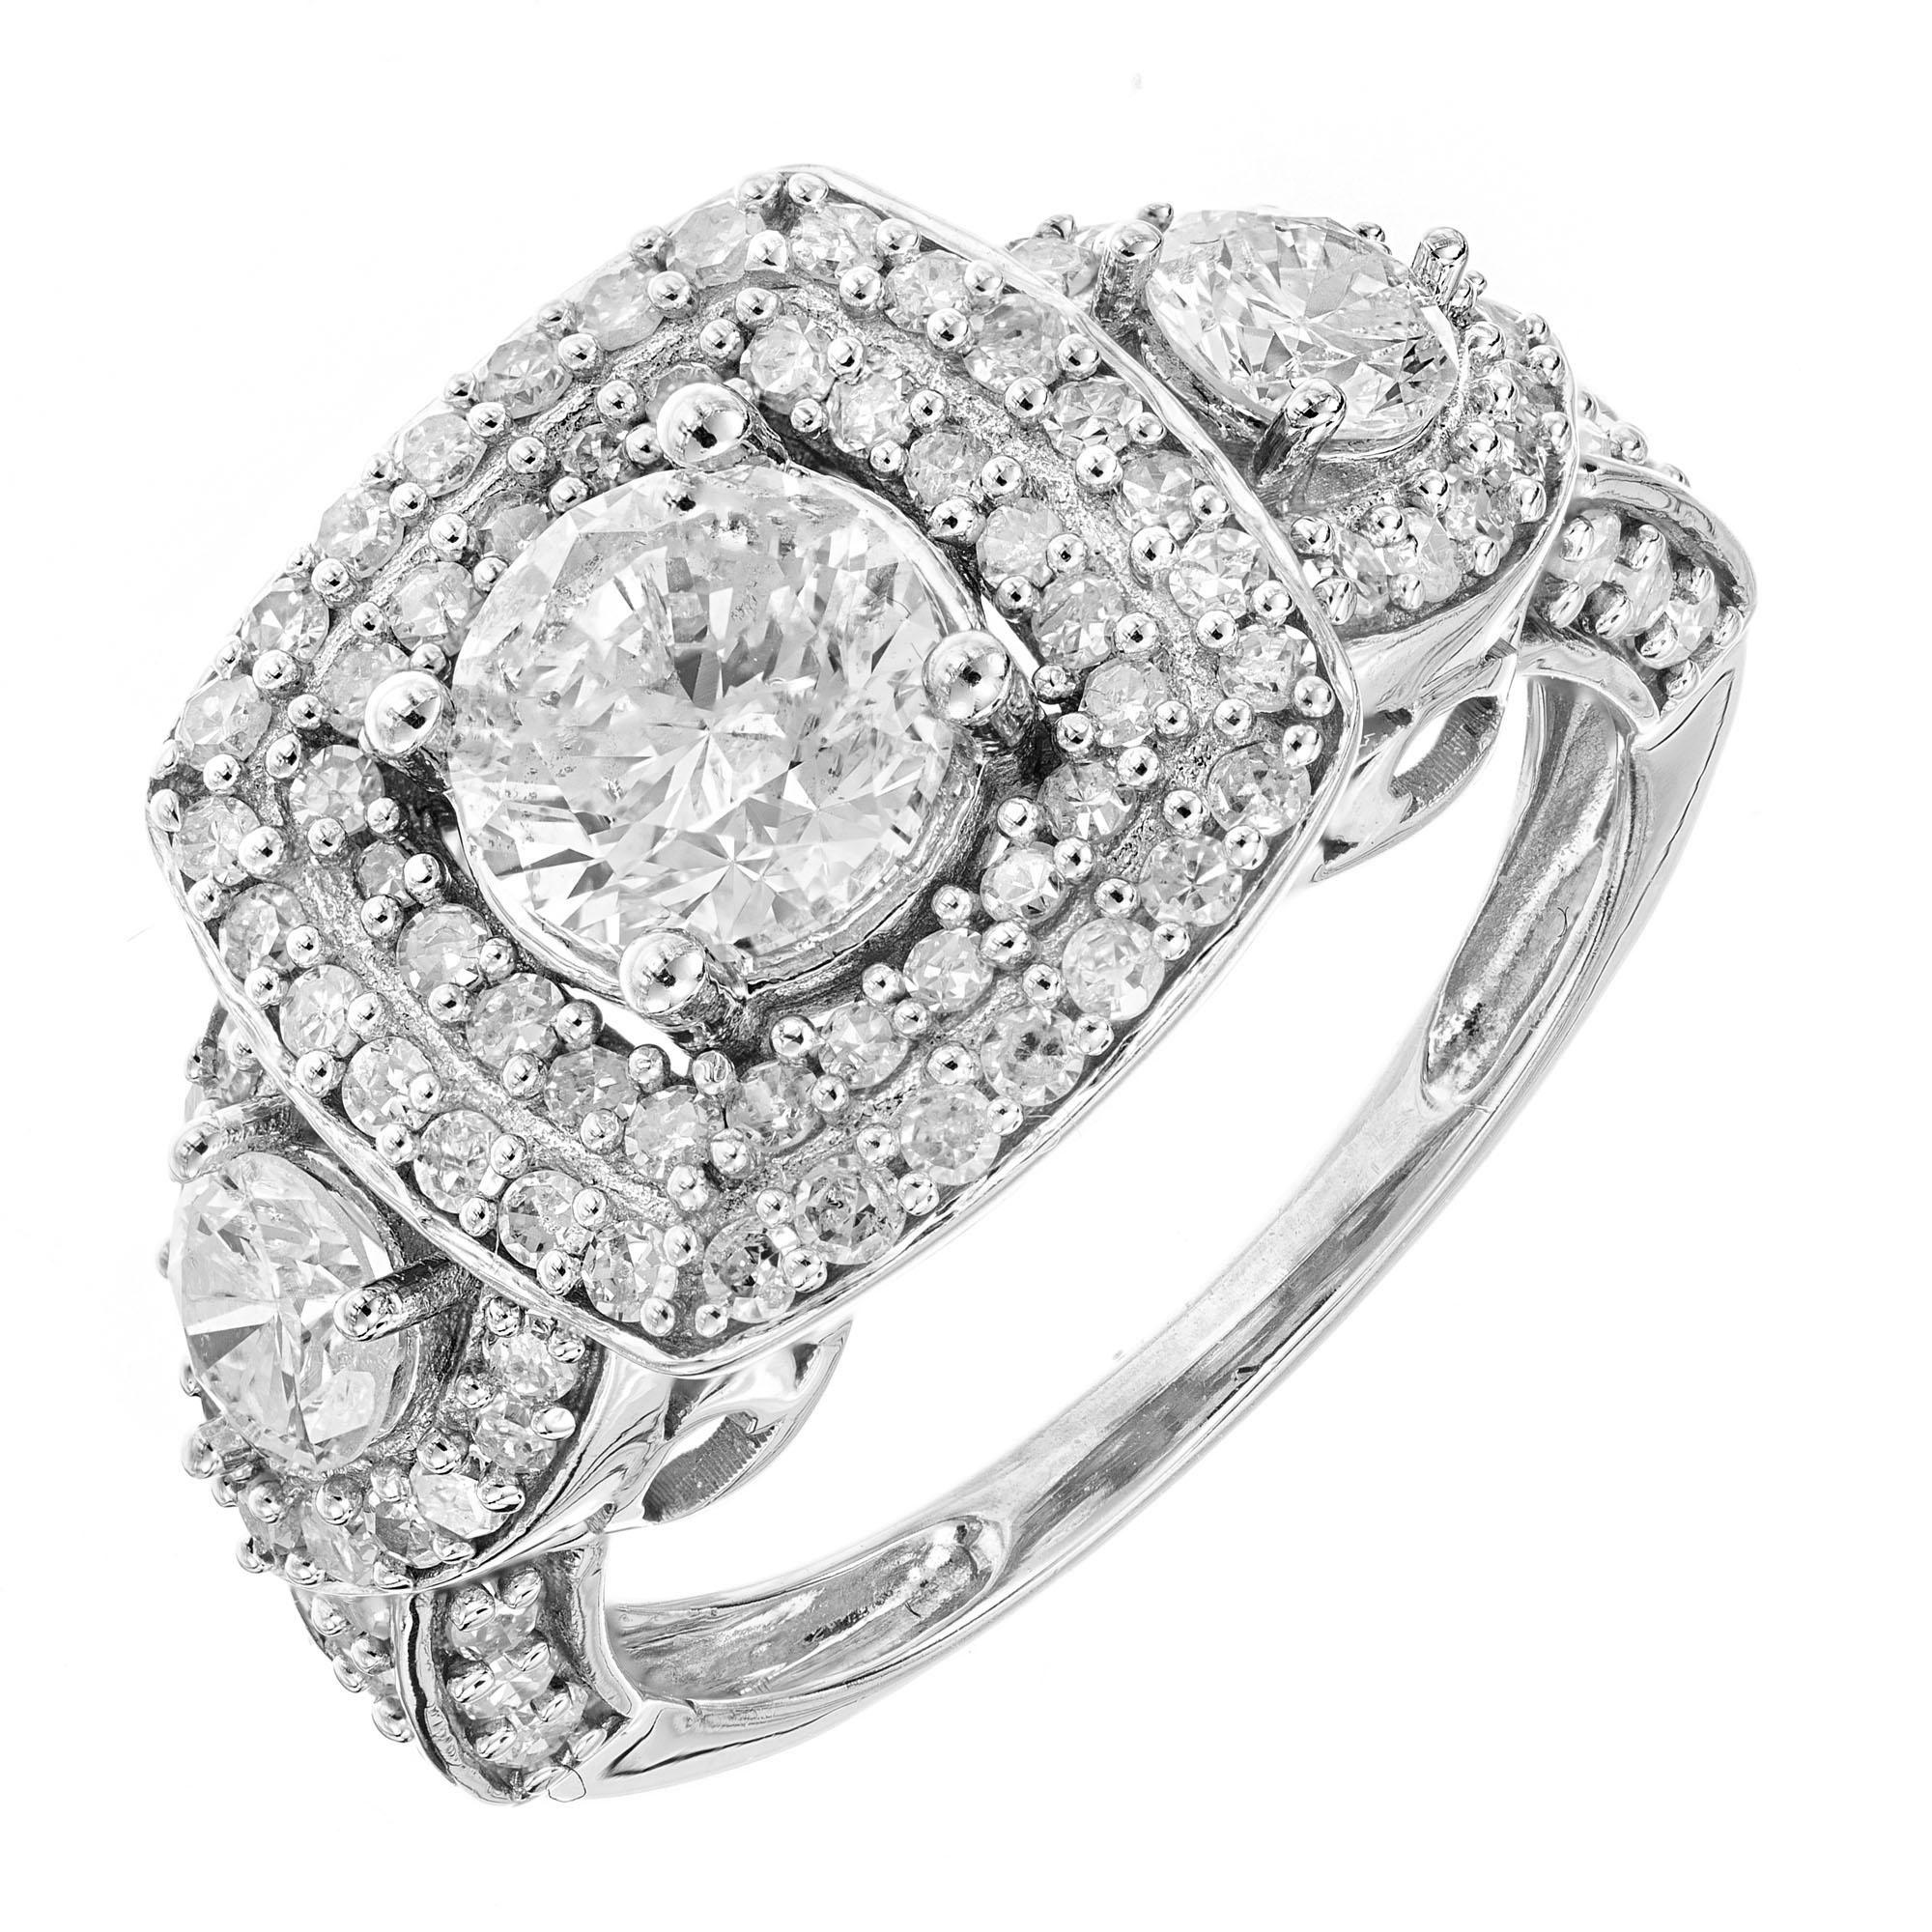 Three-stone diamond engagement ring. .77ct center brilliant cut diamond with a double halo of diamonds accented by 2 brilliant cut side diamonds with halos of round cut diamonds, in a platinum setting. 

90 round diamonds approx. total weight